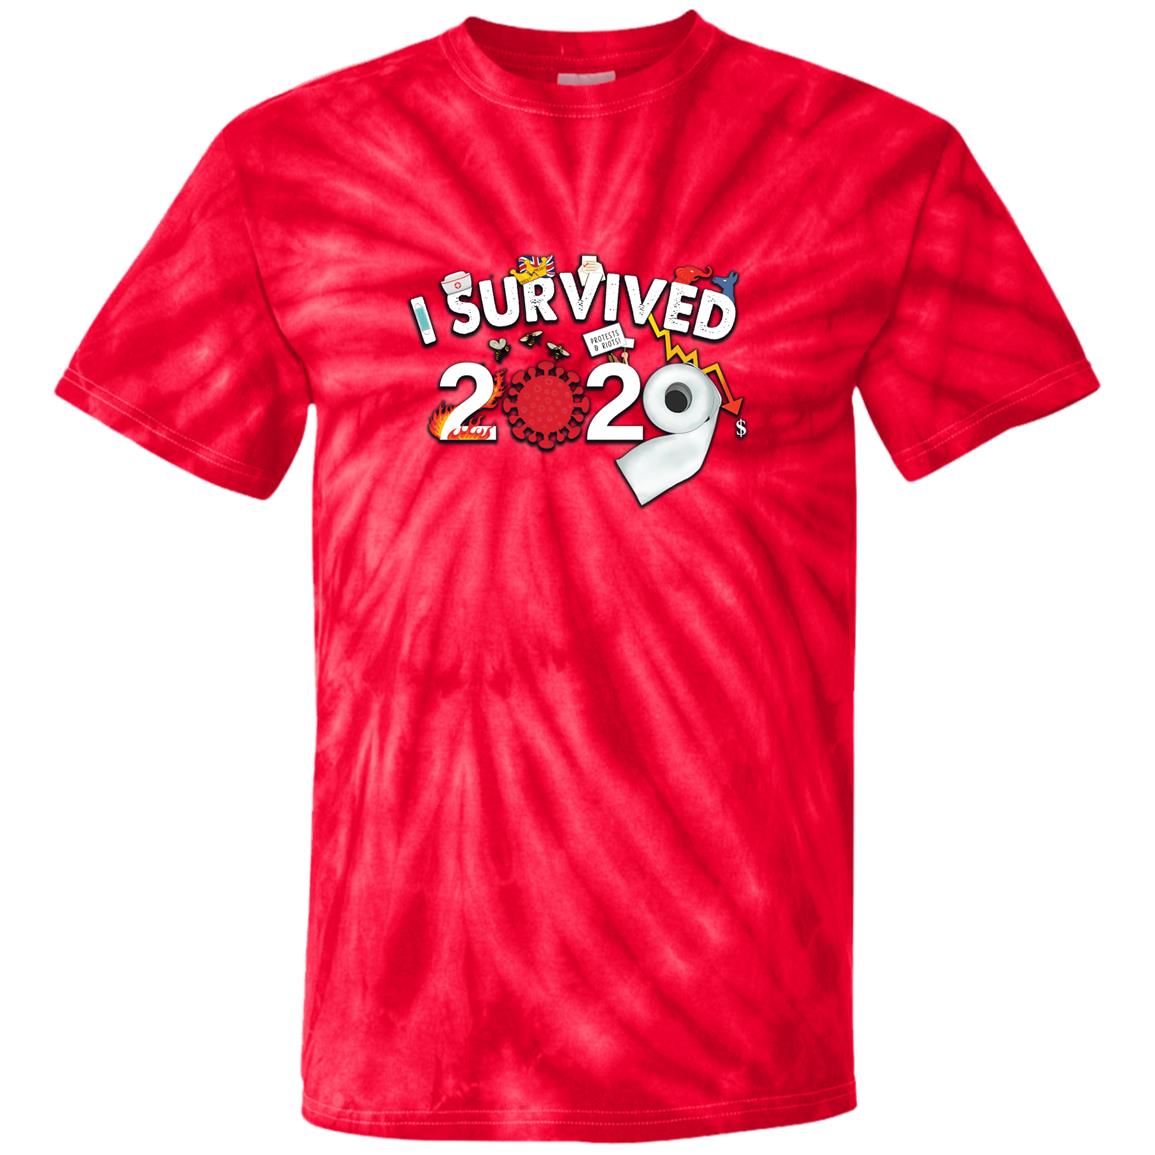 I Survived 2020 - Youth Tie Dye T-Shirt